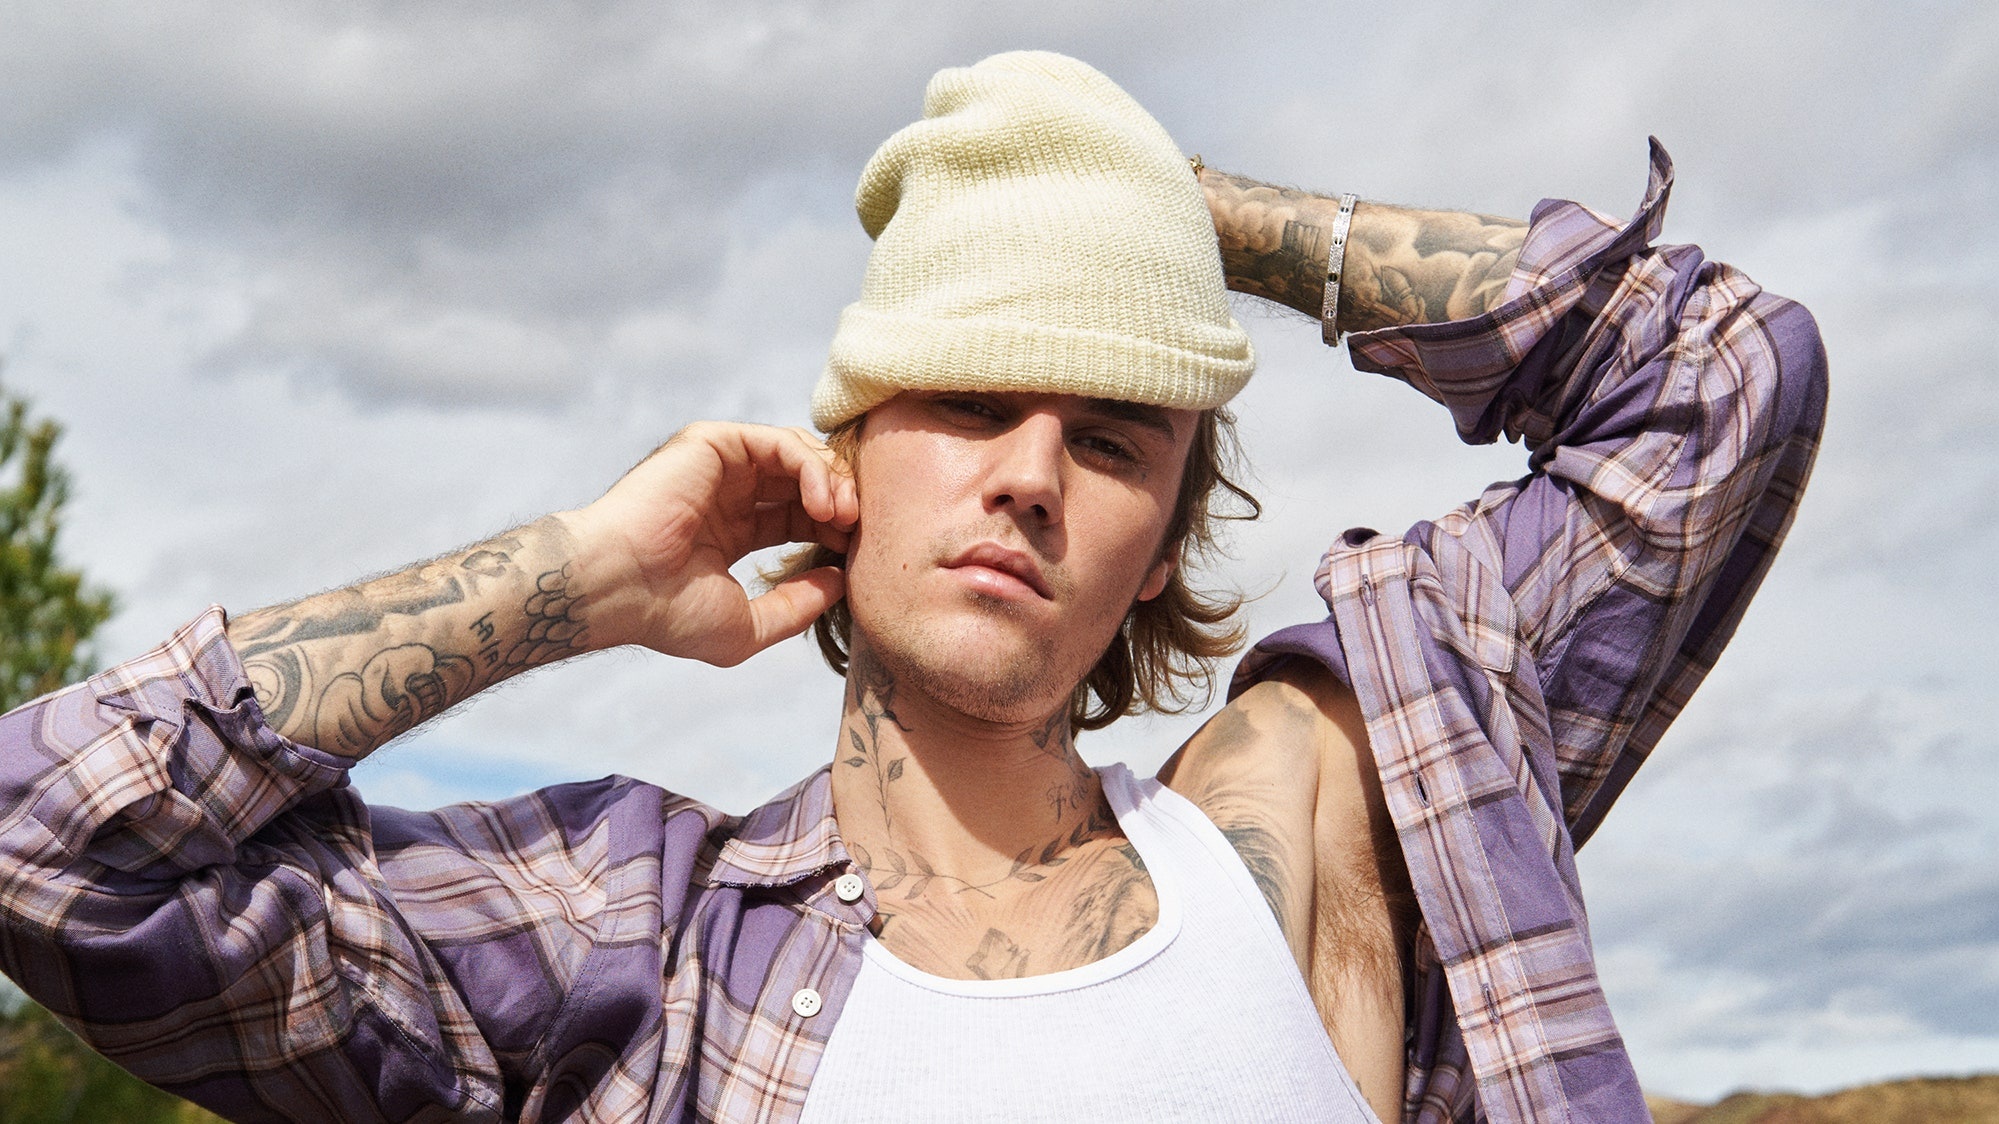 Justin Bieber and the Treadmill of Fame The Dangers of Celebrity